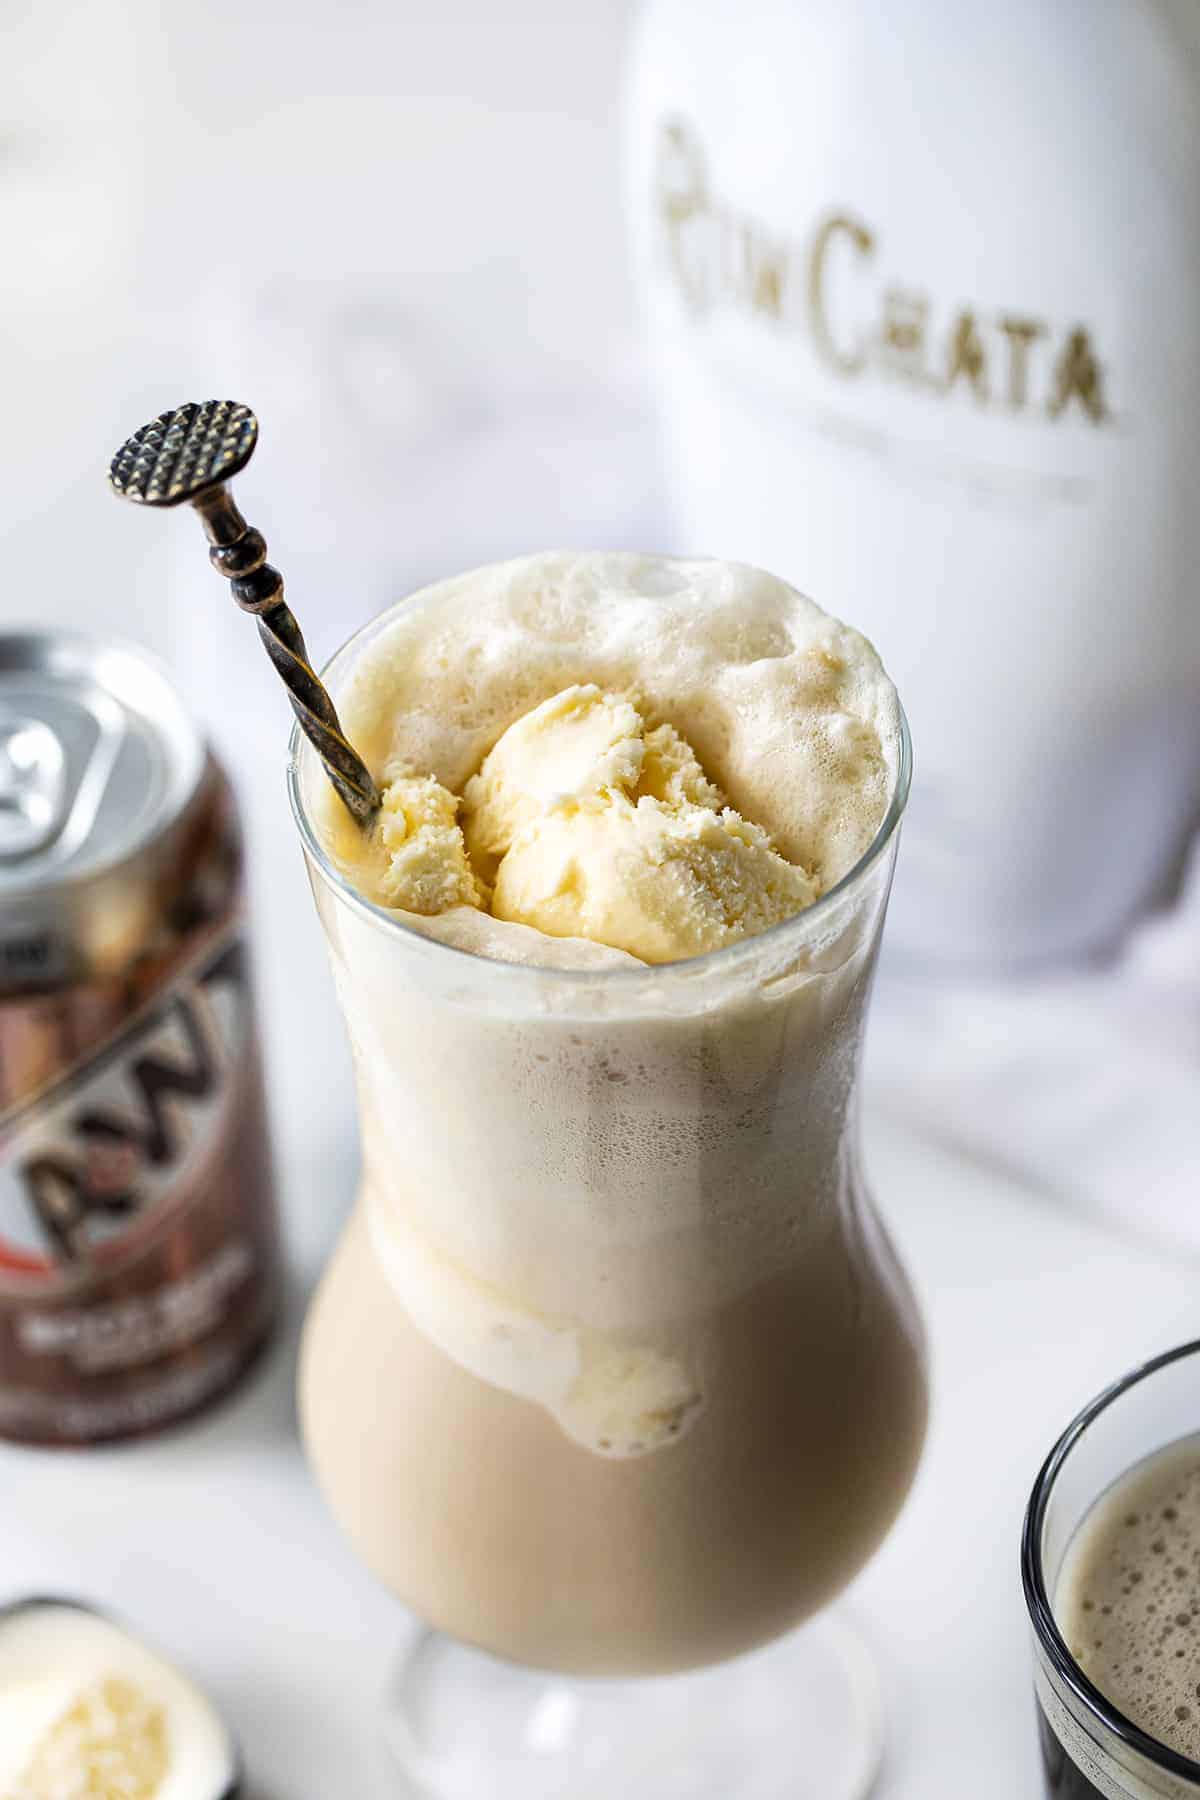 Dirty Root Beer Float - RumChata Root Beer Float in a Glass with RumChata Bottle and Root Beer Can in Background.